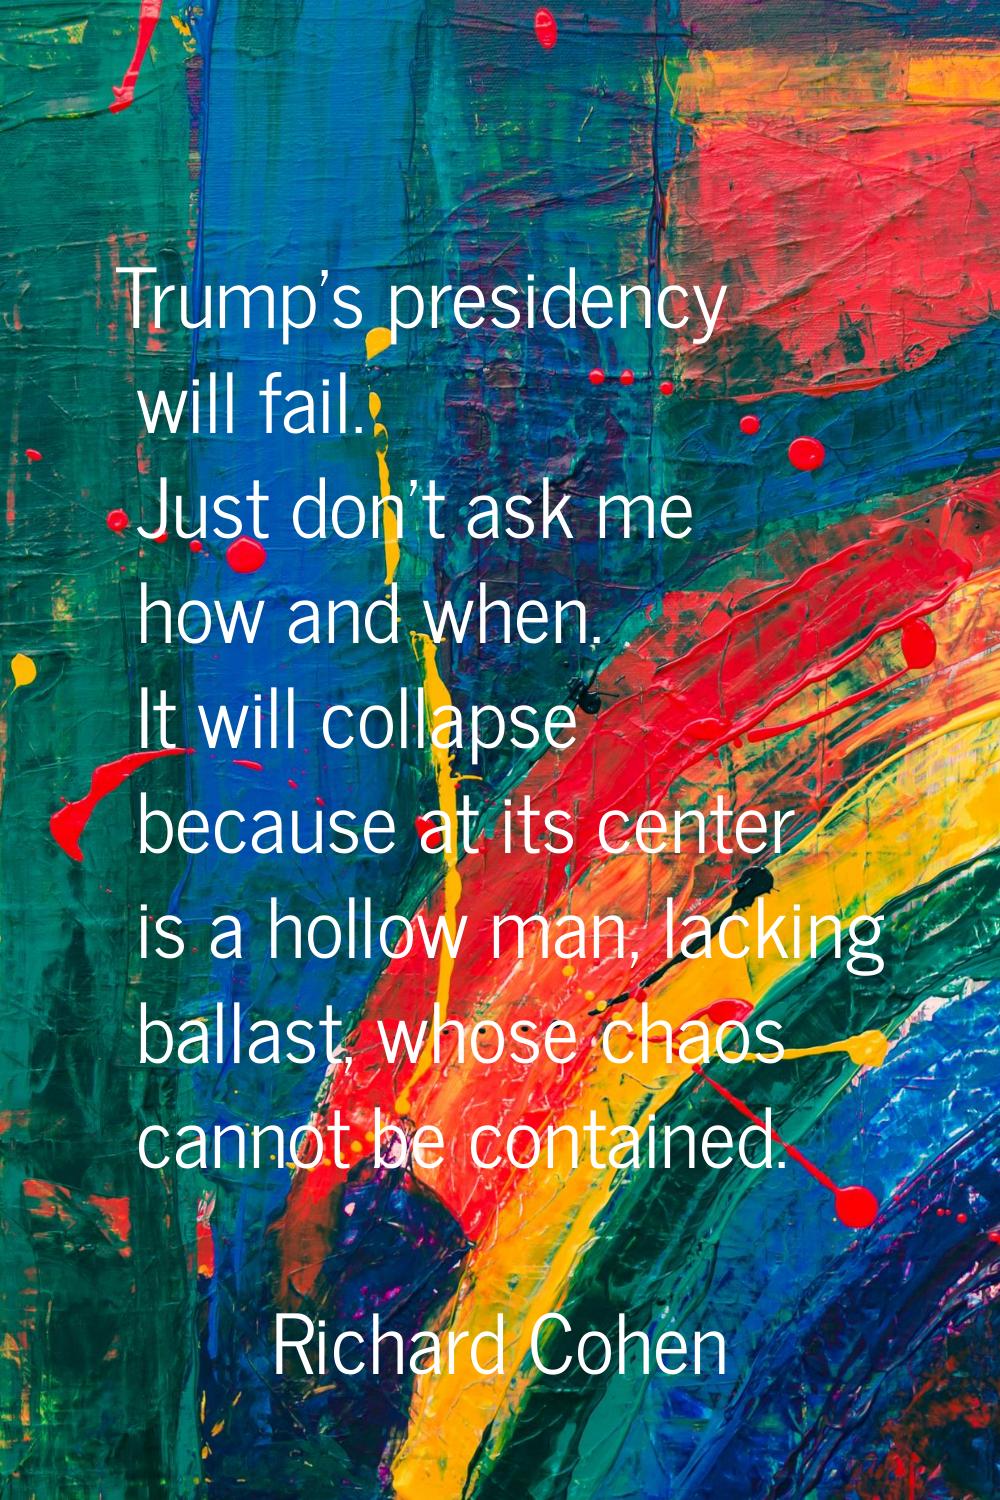 Trump's presidency will fail. Just don't ask me how and when. It will collapse because at its cente